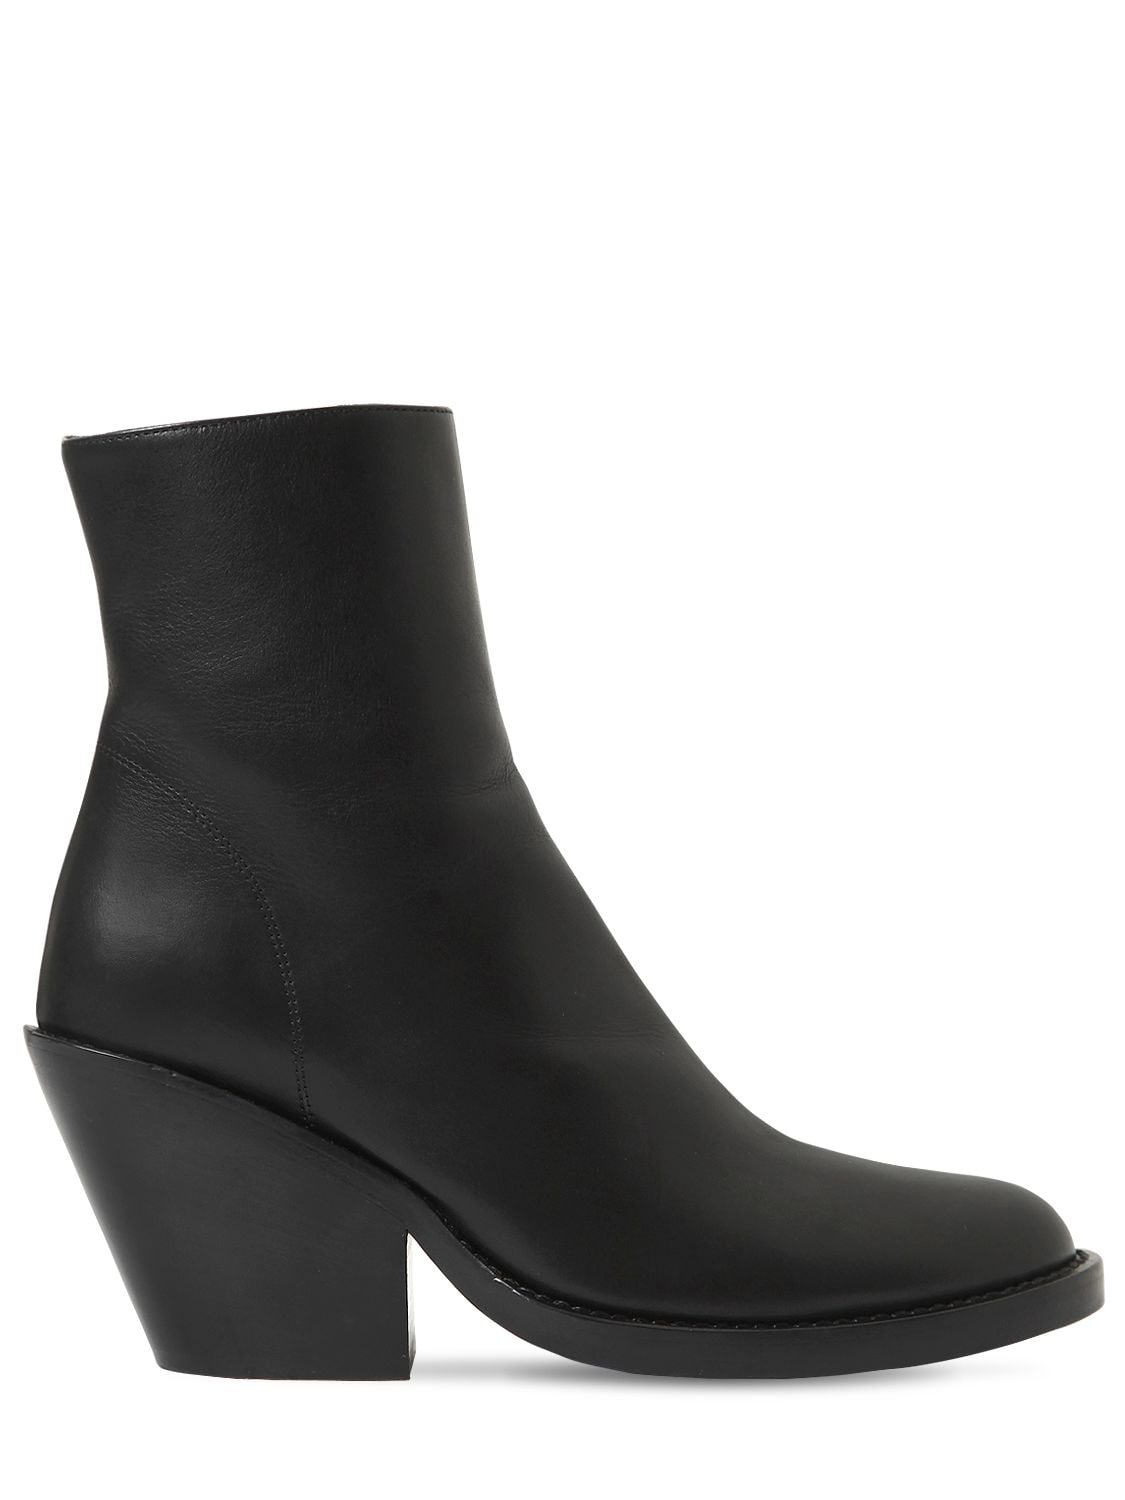 ANN DEMEULEMEESTER 80MM LEATHER ANKLE BOOTS,68I02U004-MDk50